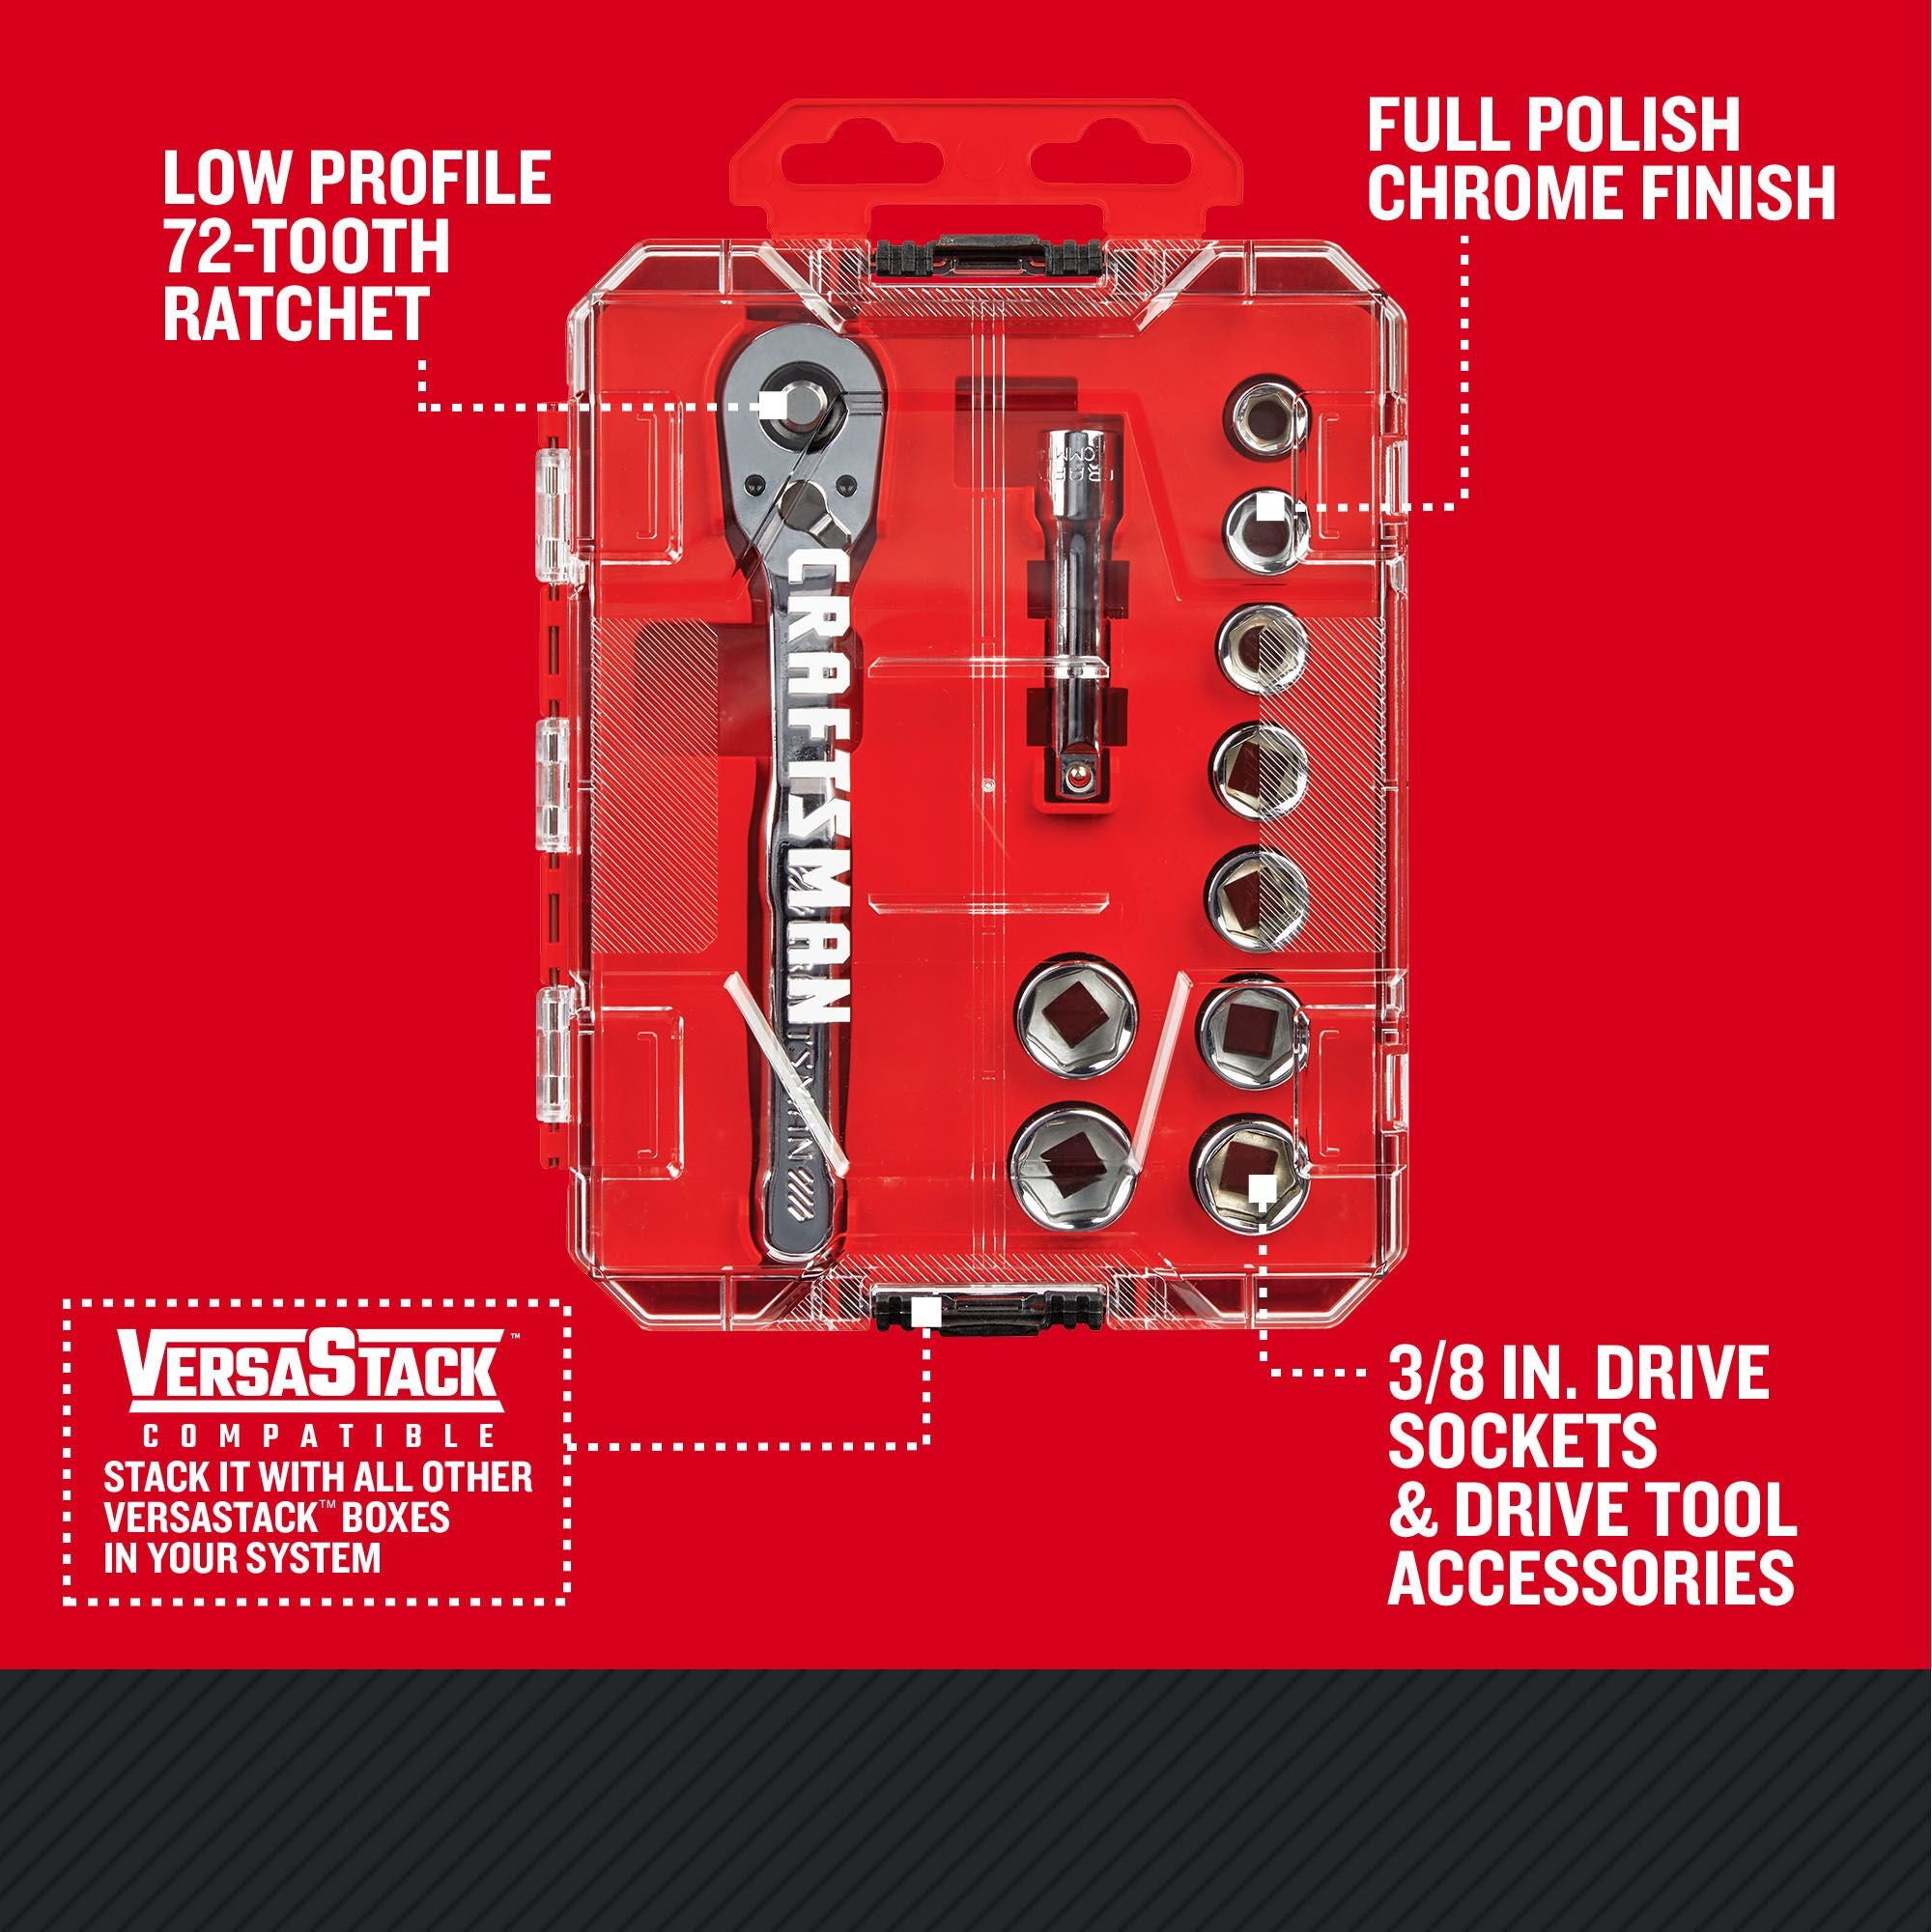 CRAFTSMAN Low Profile 11 piece 3/8 inch drive NANO MECHANICS TOOL SET with features and benefits highlighted